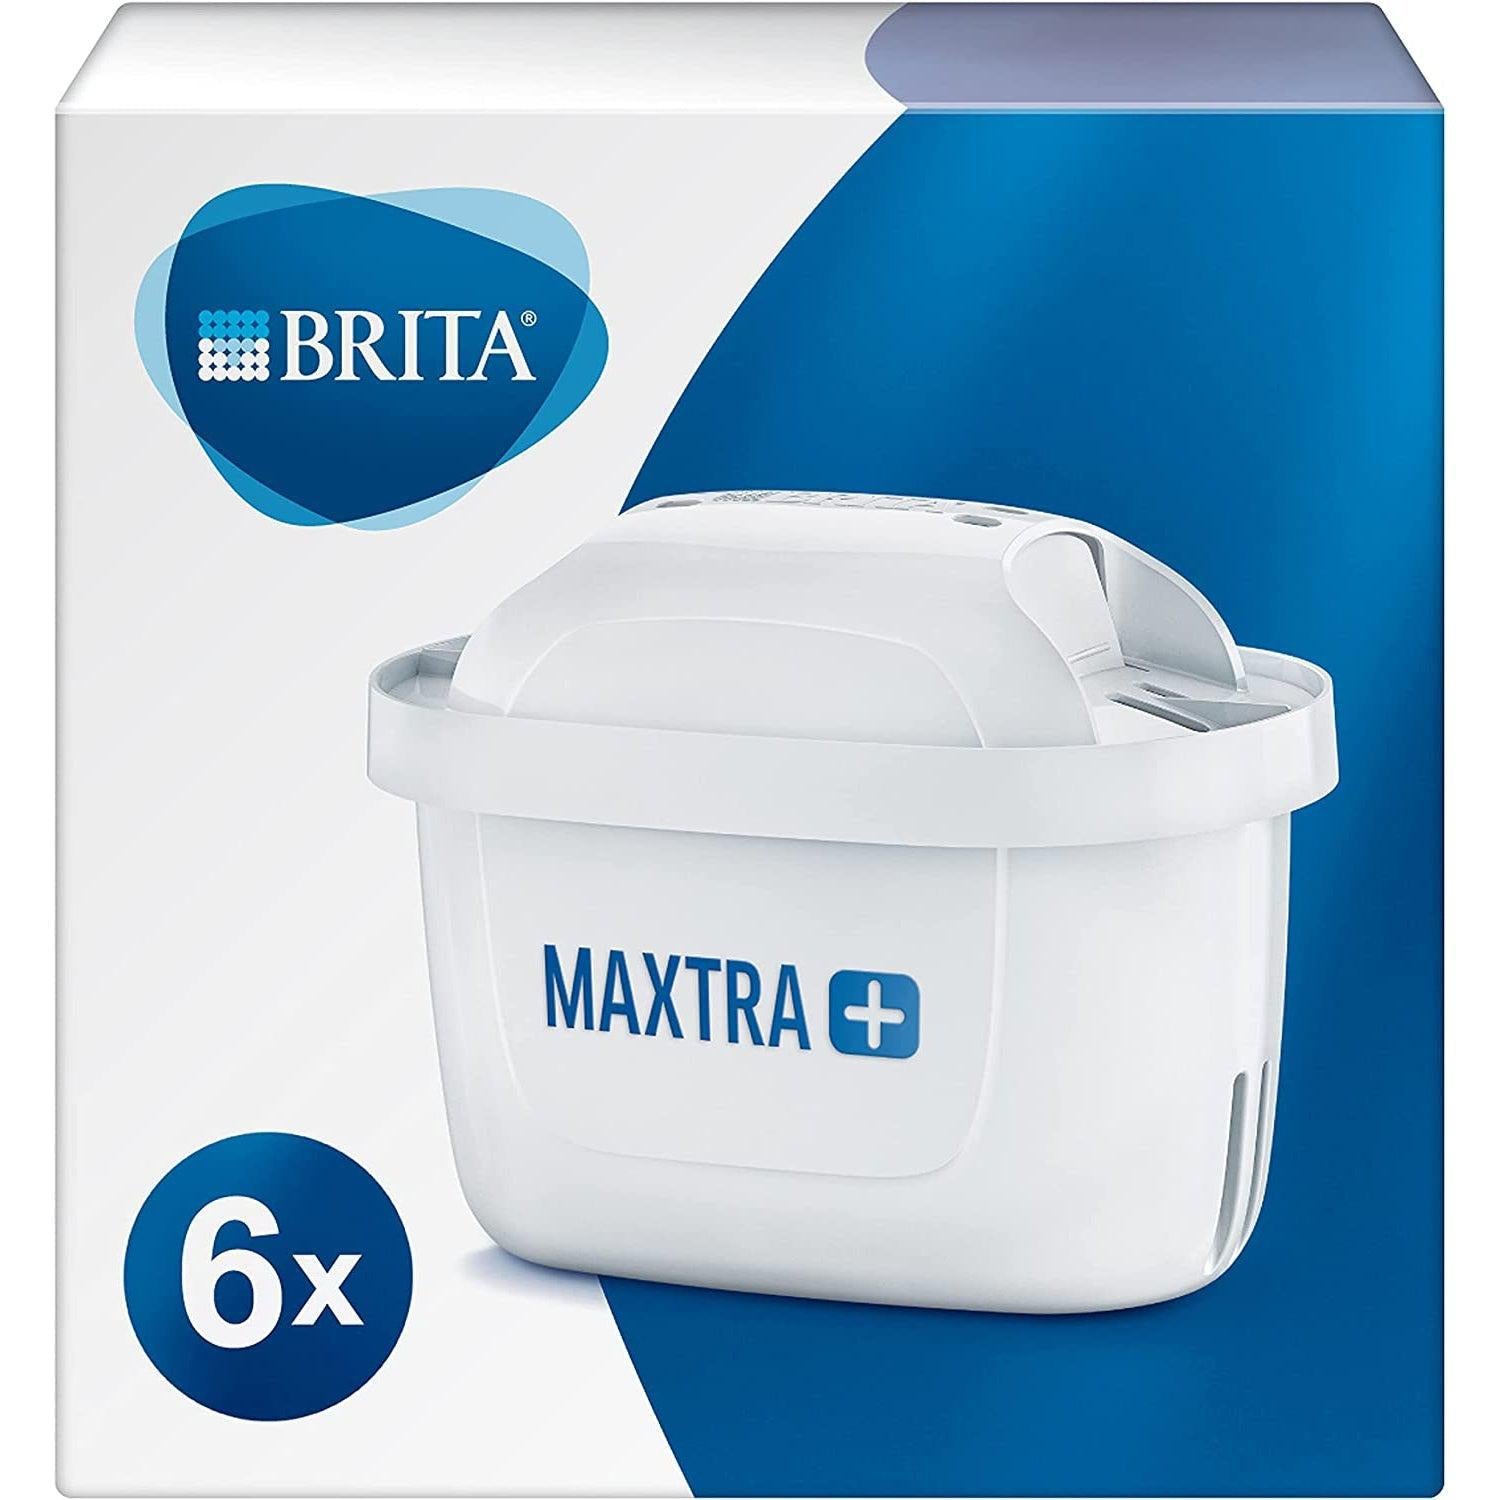 BRITA Maxtra+ Water Filter Cartridges - MicroFlow Technology Filtration, 6 Pack - Healthxpress.ie